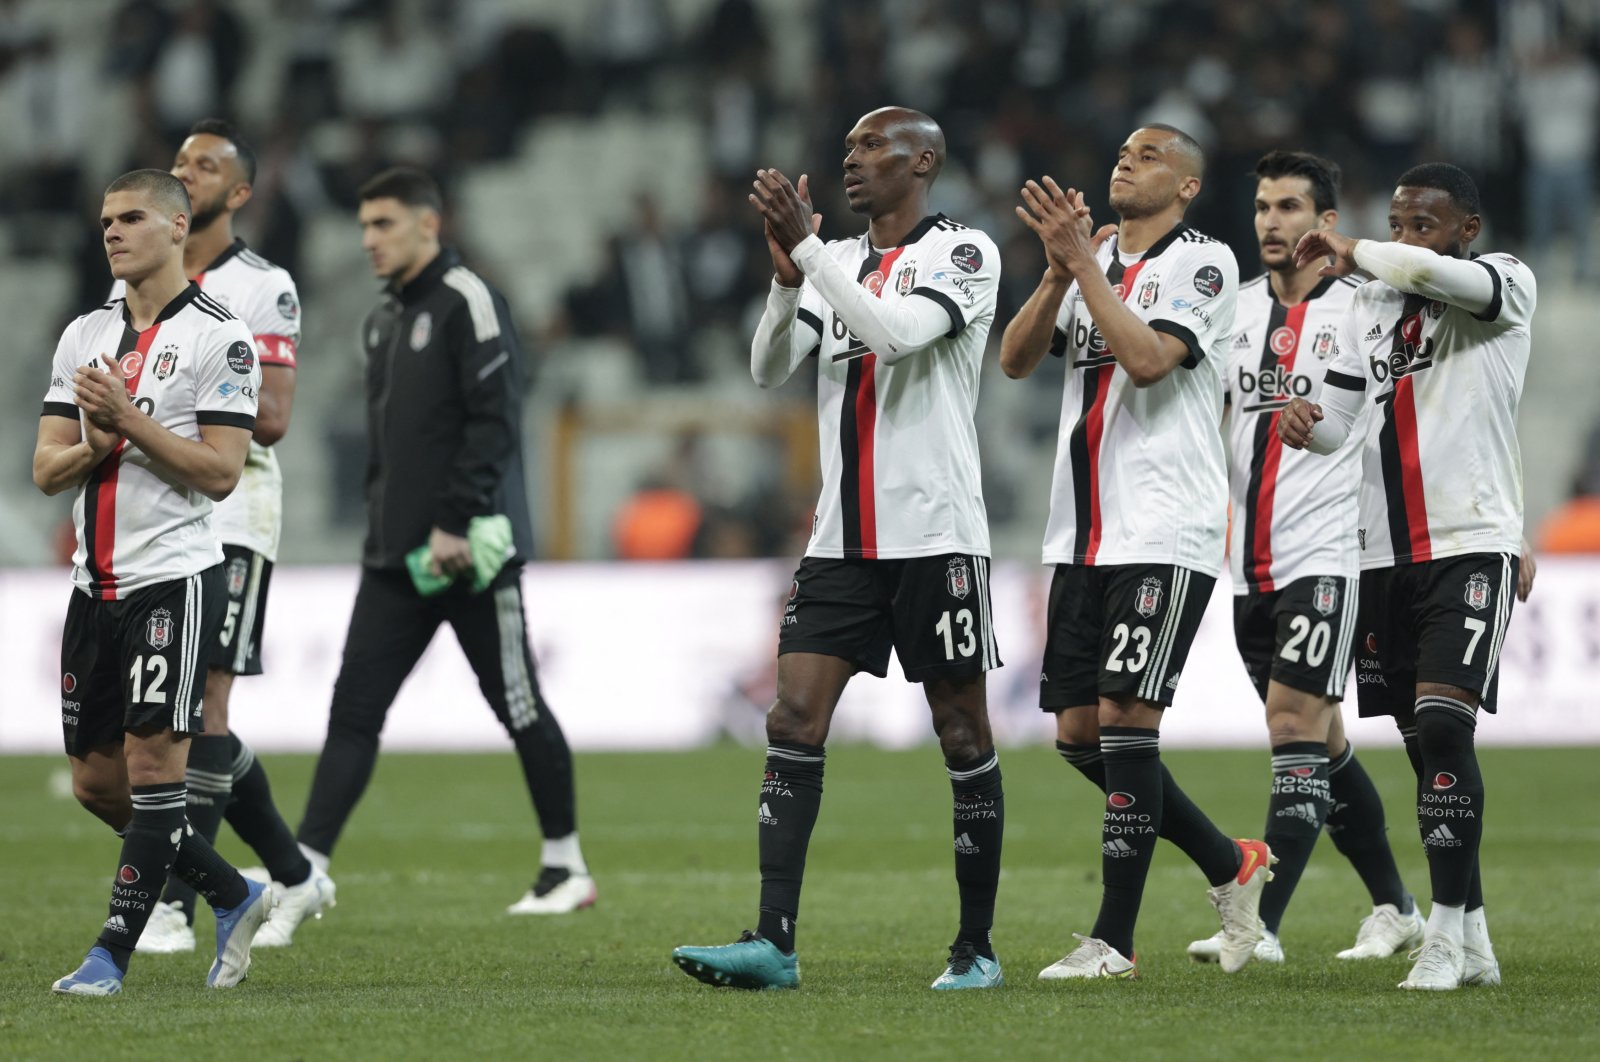 Beşiktaş&#039;s Atiba Hutchinson and teammates applaud fans after the match at Vodafone Park, Istanbul, May 8, 2022. (Reuters Photo)